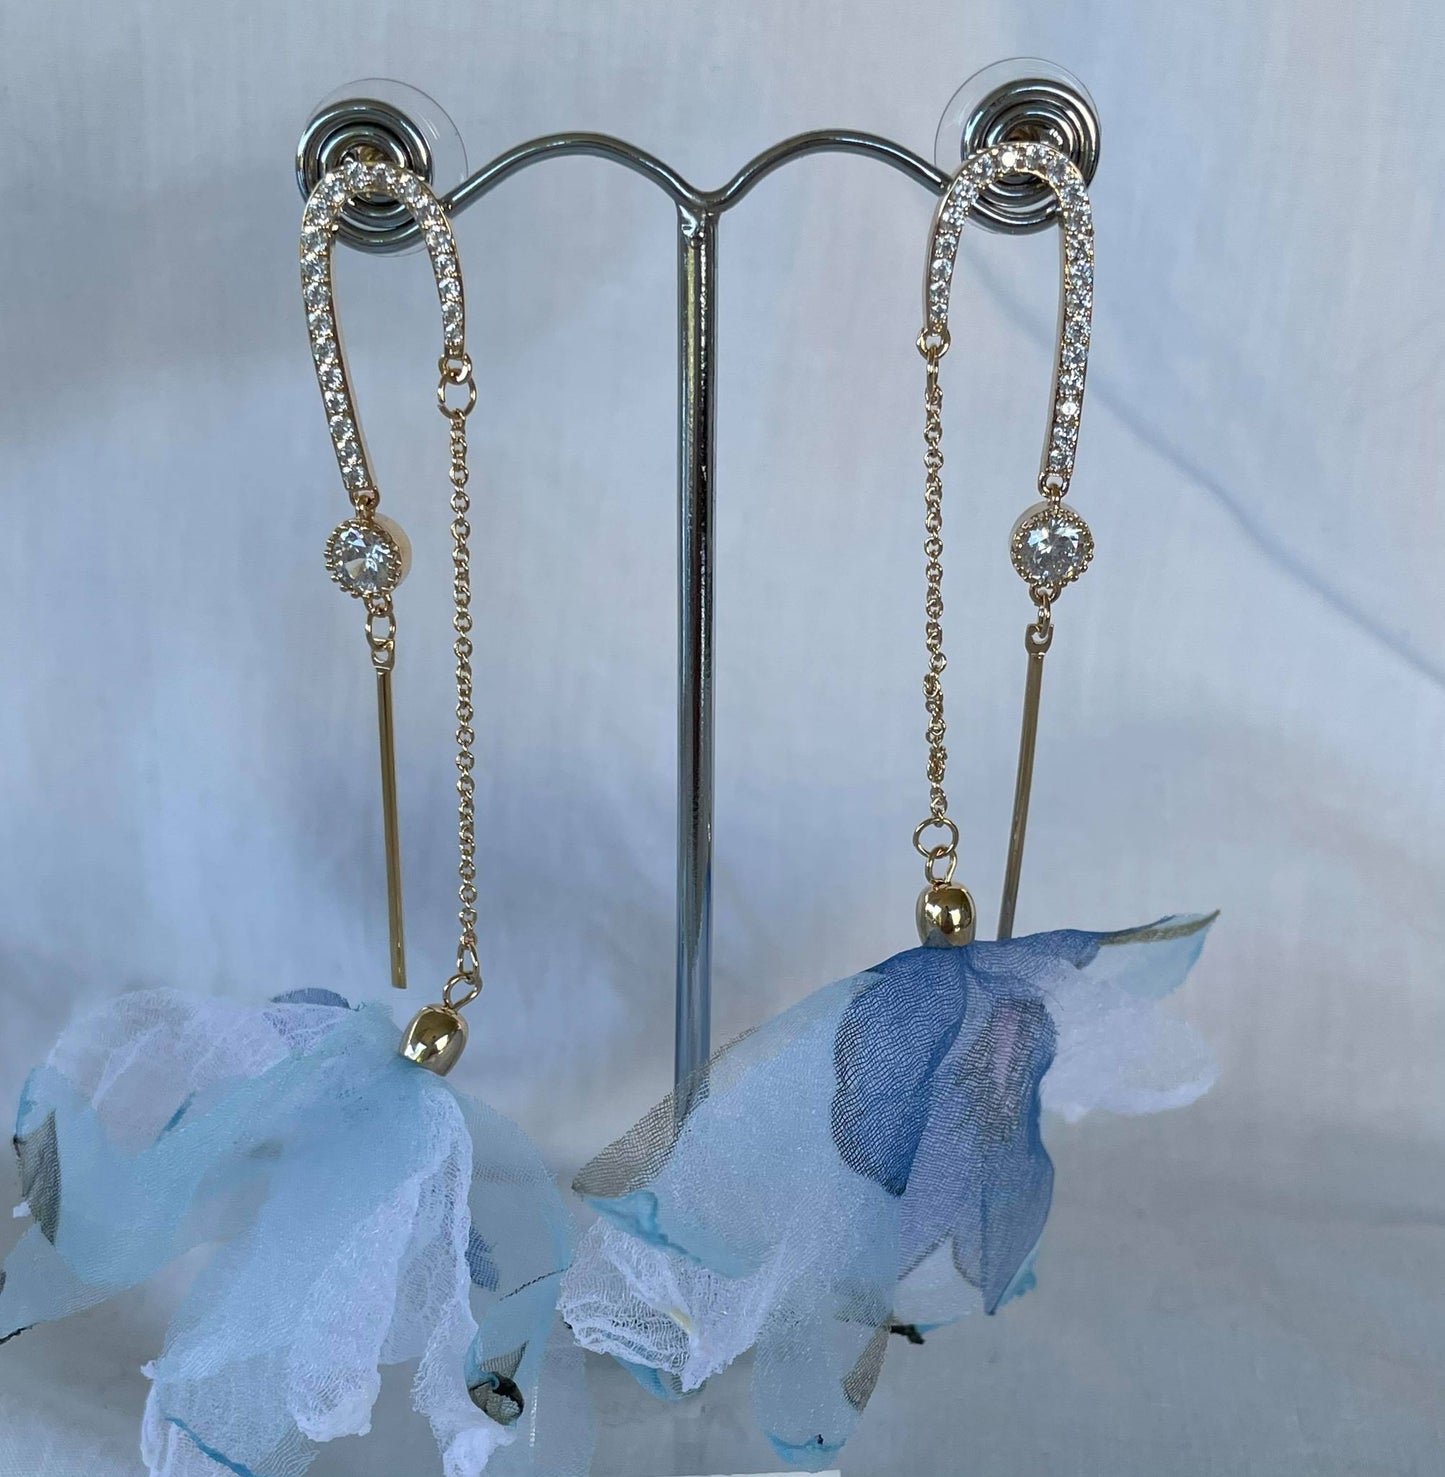 Fabric flowers on gold chain and crystal drop earrings